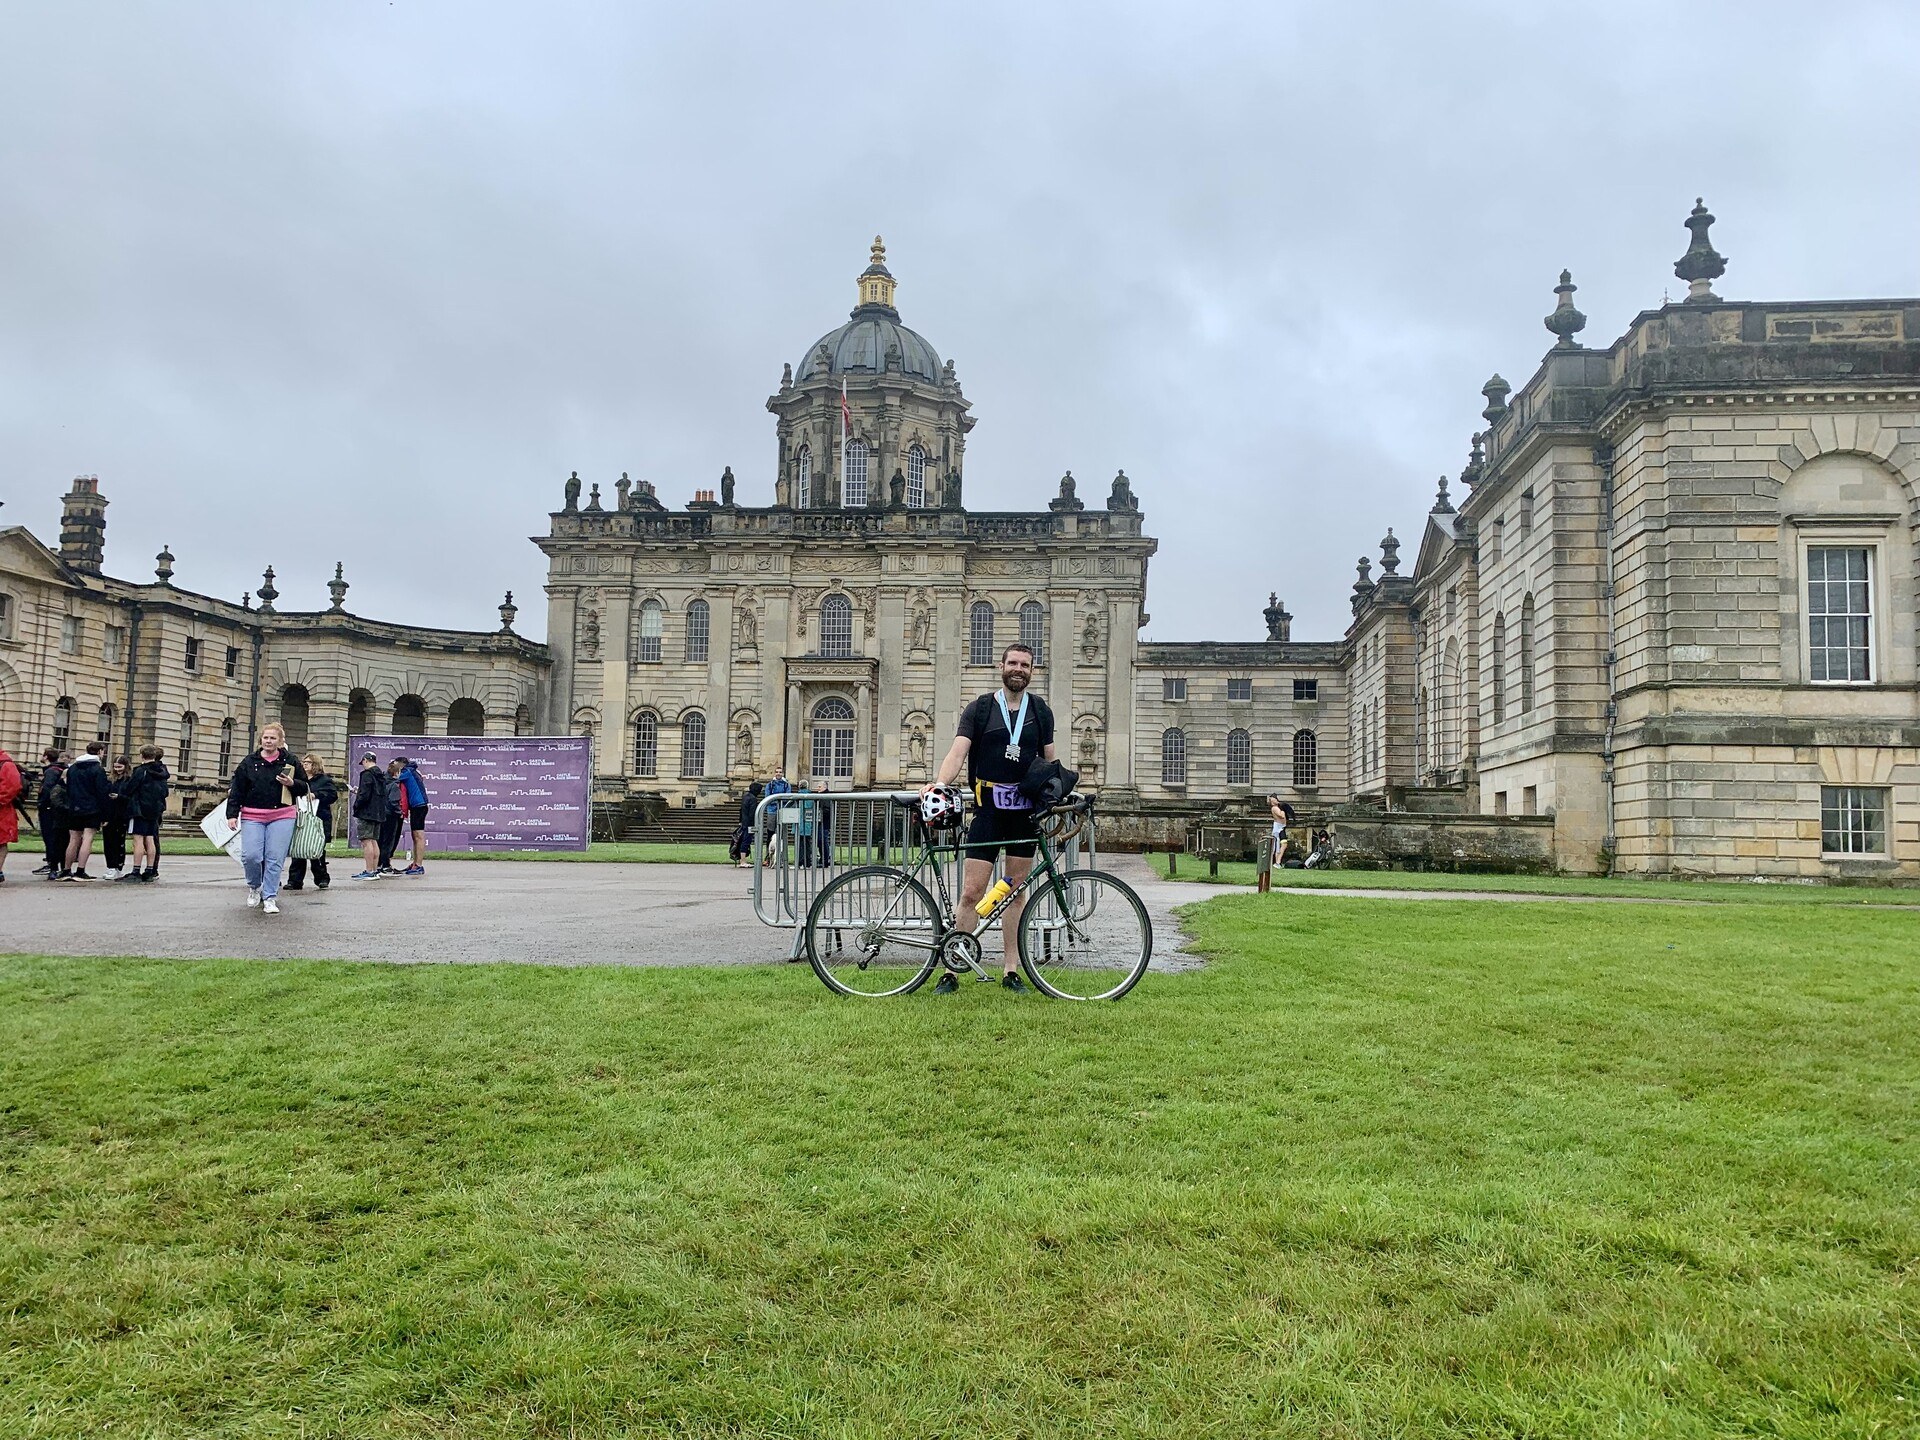 Me, standing with my bike on a grassy lawn with Castle Howard in the background.